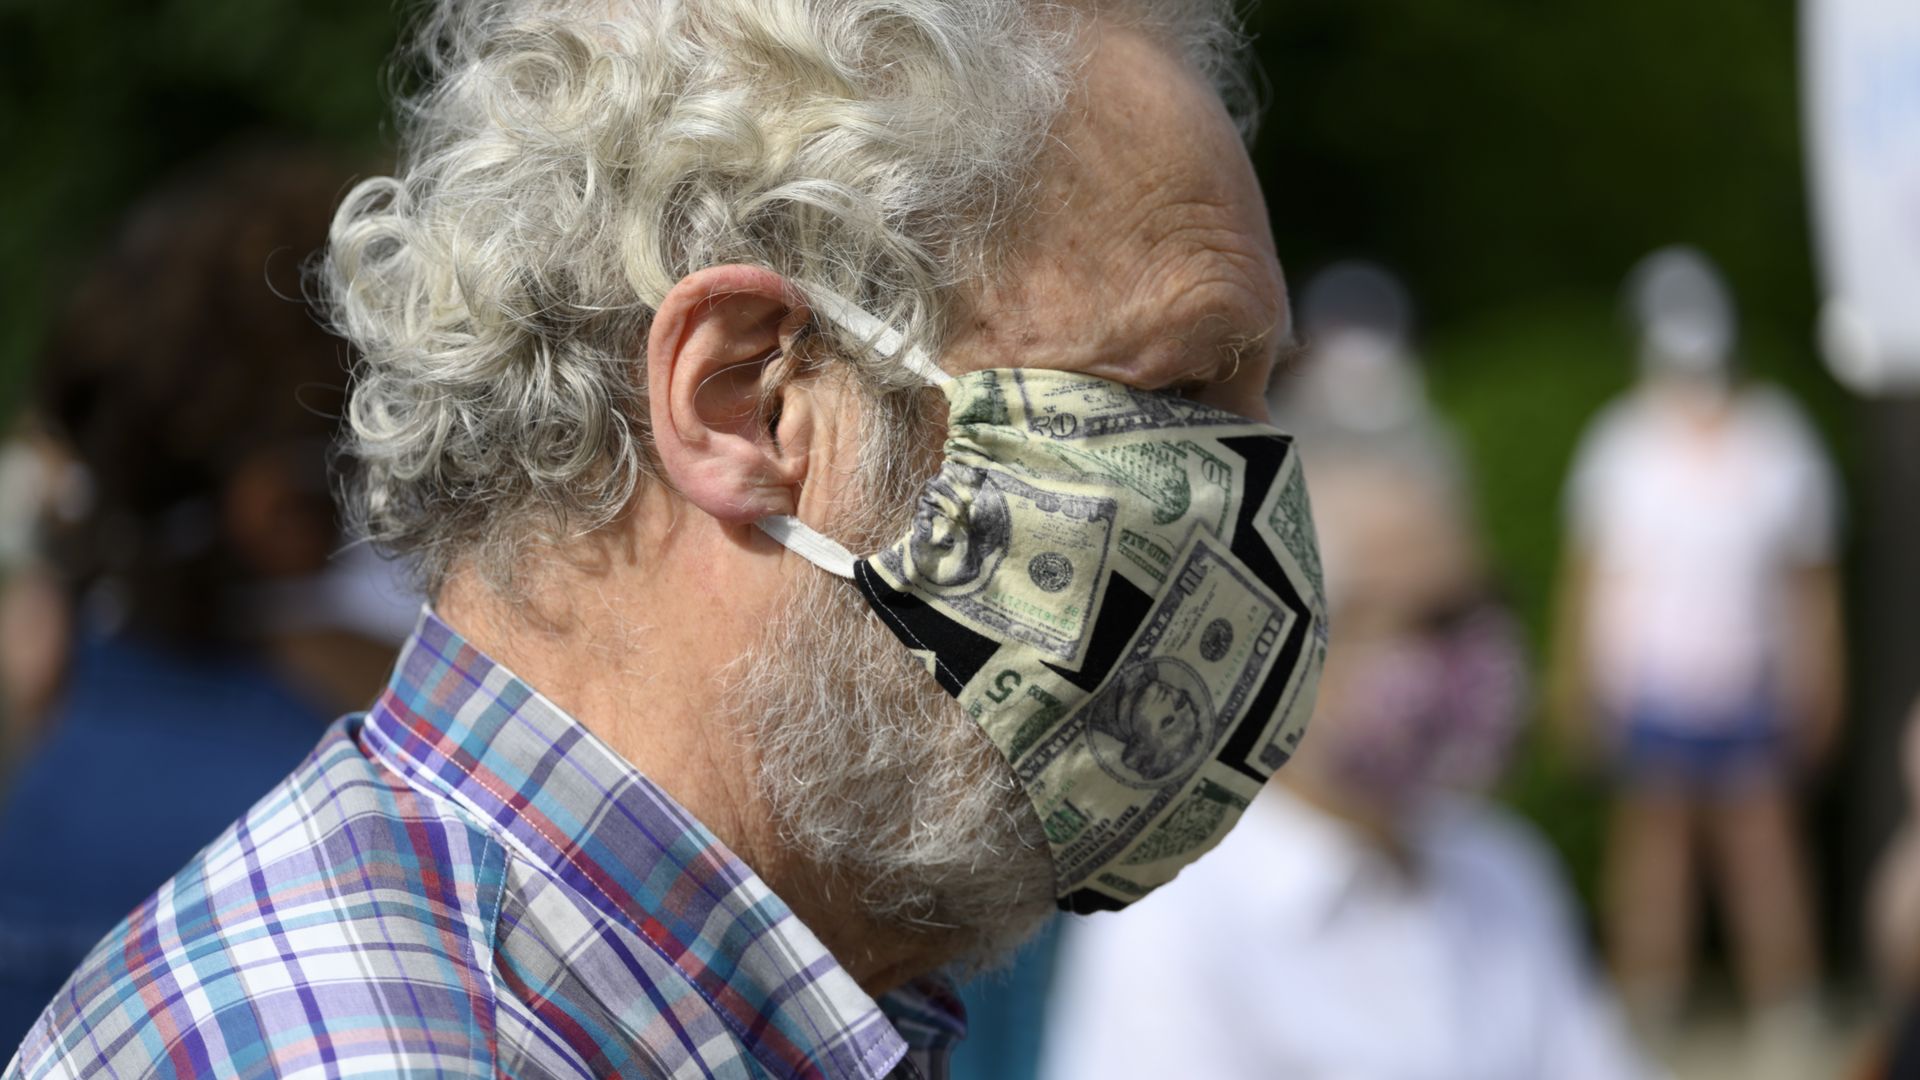 A person wearing a face mask with a U.S. currency print.